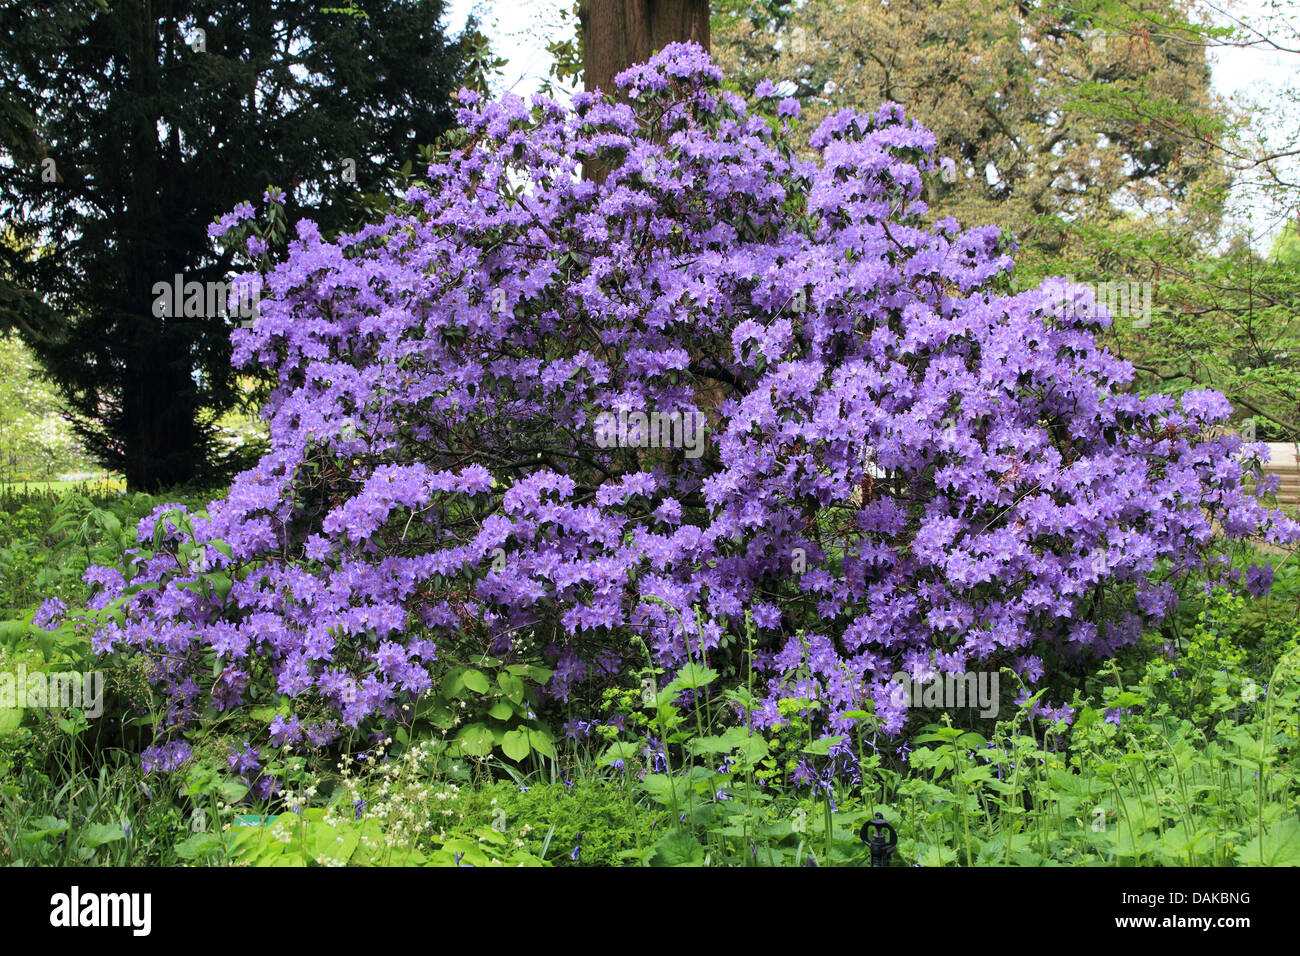 Rhododendron (Rhododendron spec.), violet Floraison rhododendron, Allemagne Banque D'Images